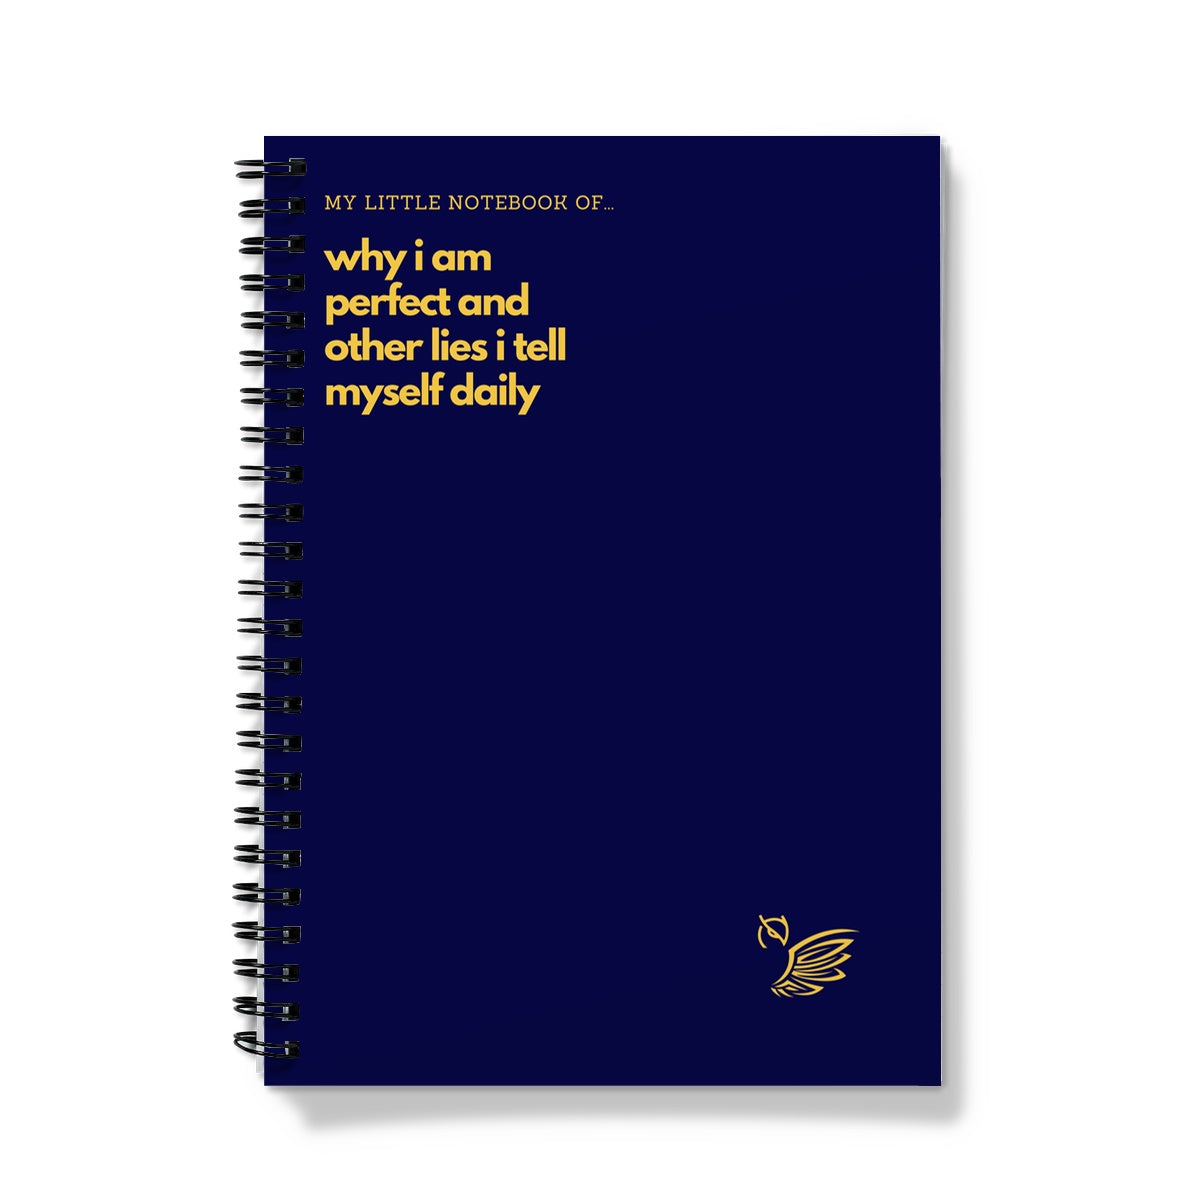 My Little Notebook Of... Why I Am Perfect And Other Lies I Tell Myself Daily Notebook